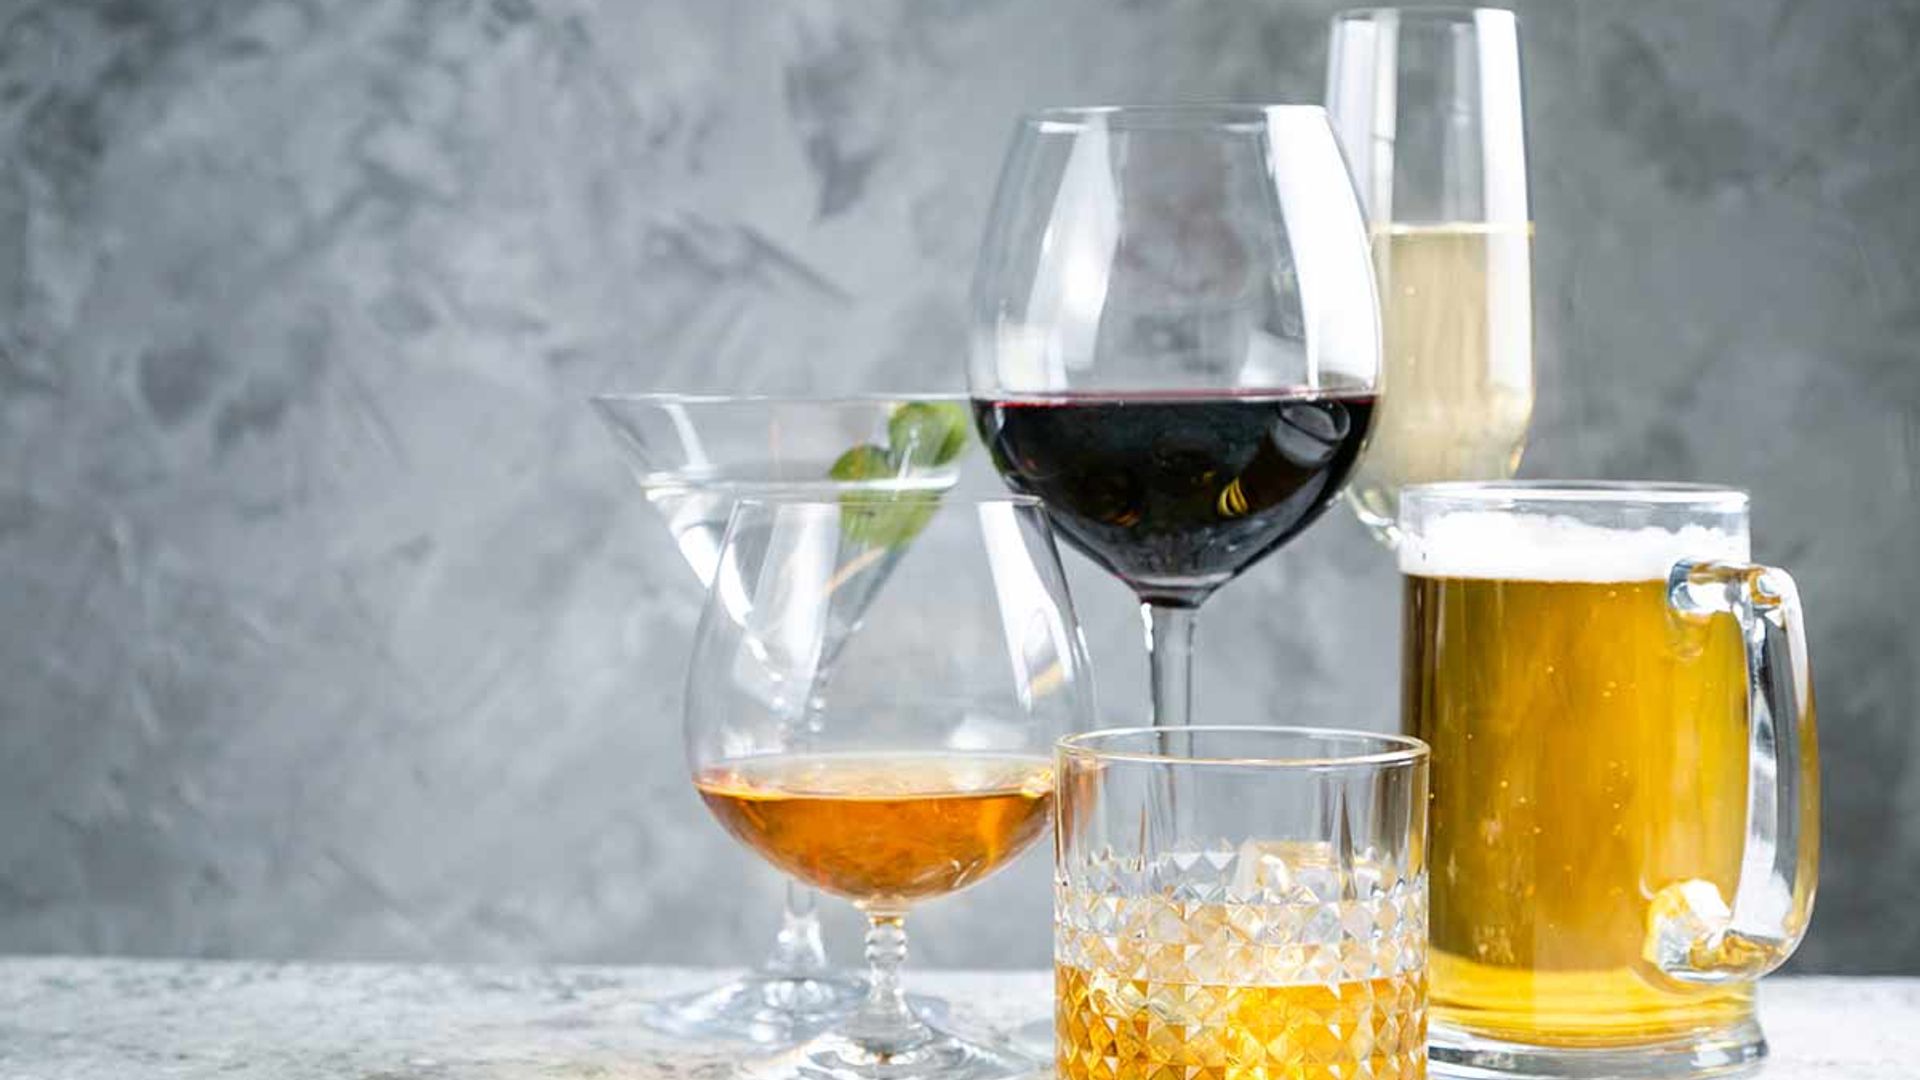 18 of the best alcohol-free and low alcohol drinks for Dry January